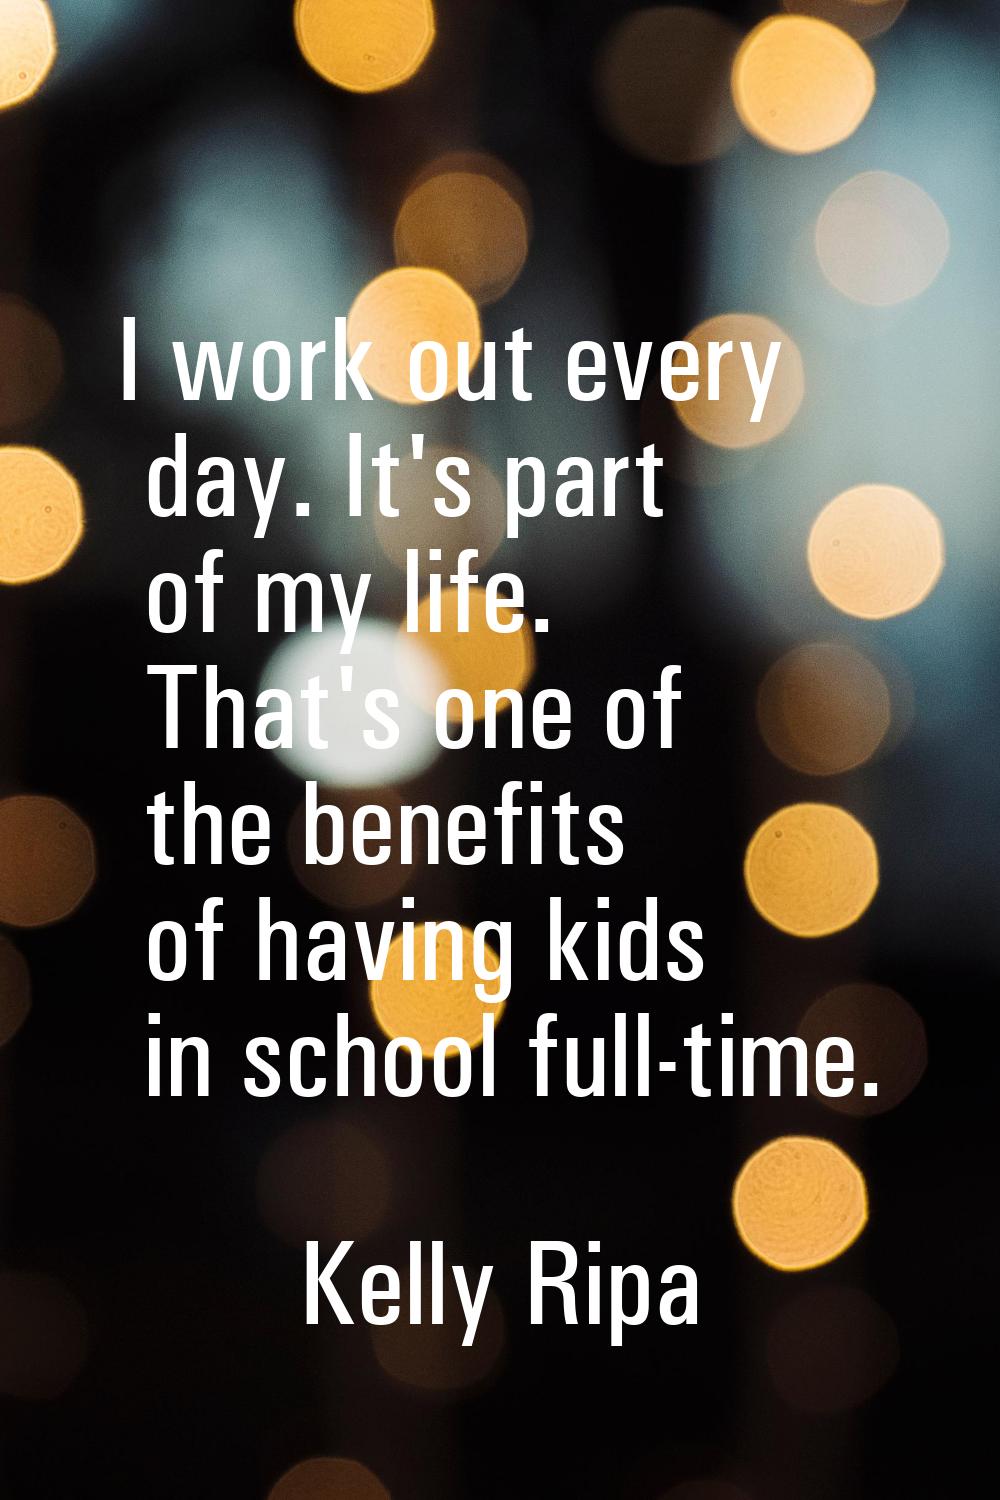 I work out every day. It's part of my life. That's one of the benefits of having kids in school ful